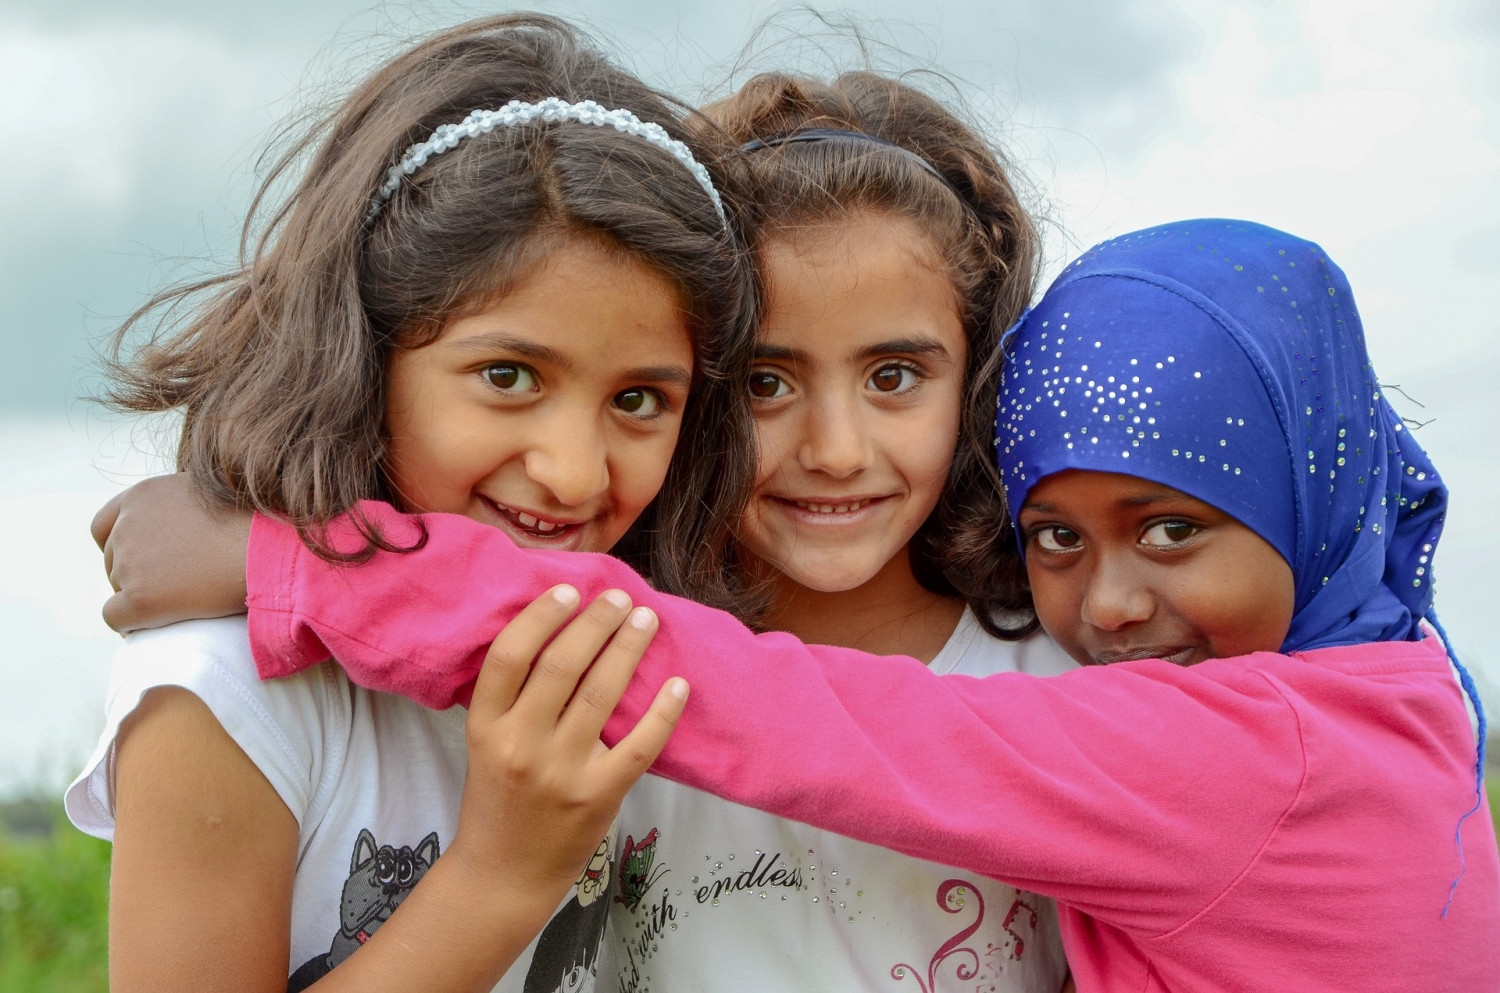 Three young girls, including one wearing a head scarf, hugging and smiling, directly looking at the camera